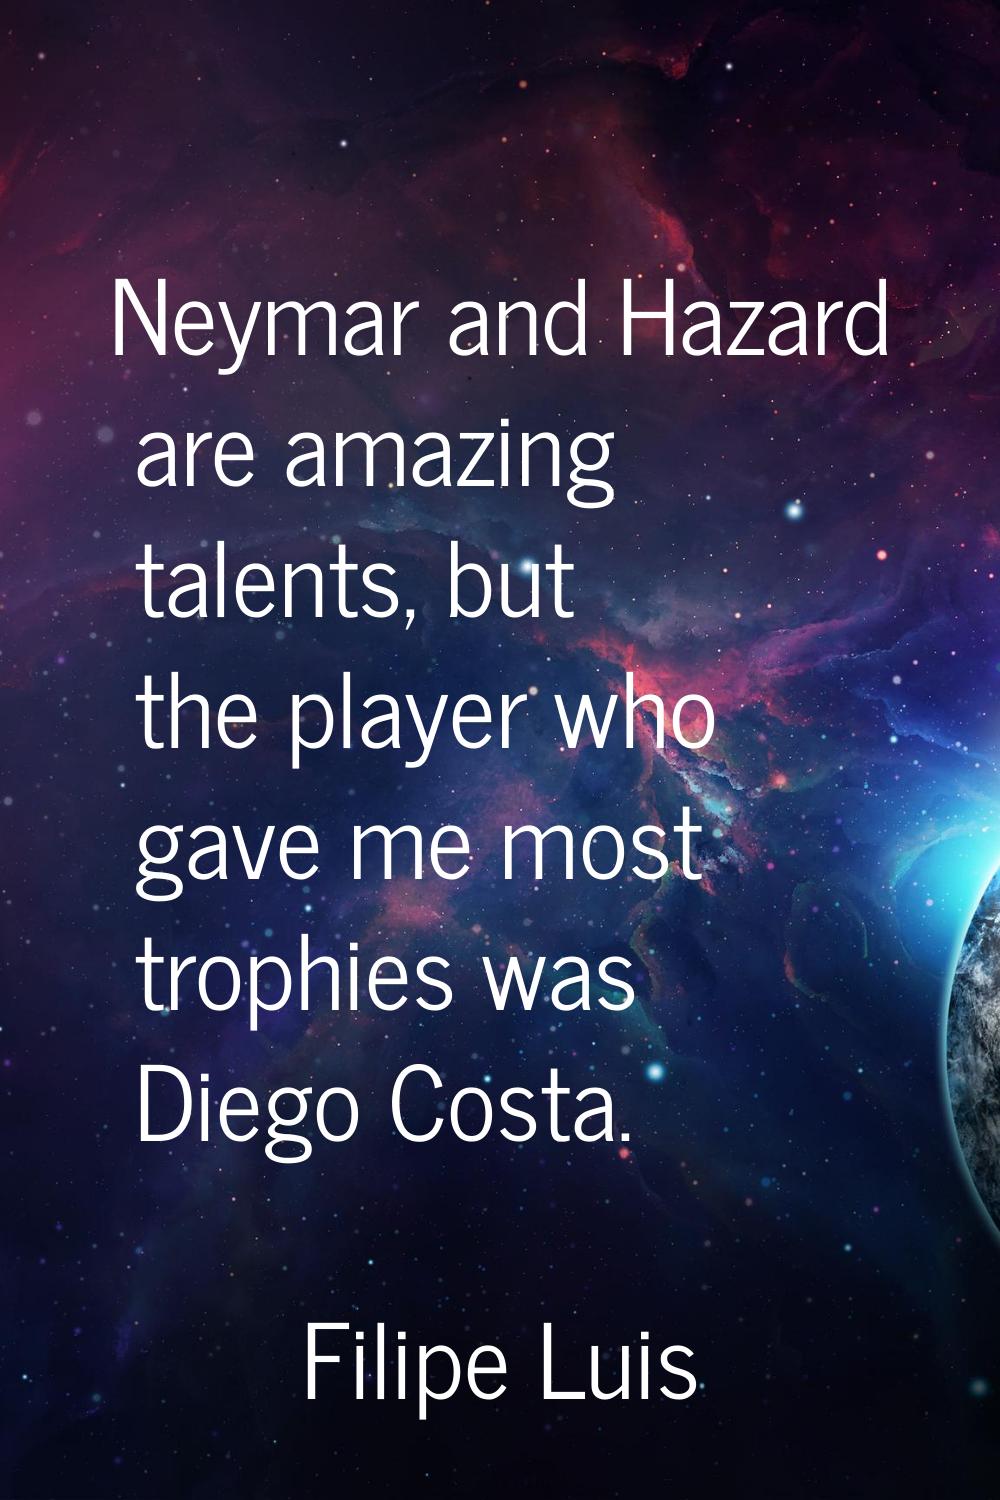 Neymar and Hazard are amazing talents, but the player who gave me most trophies was Diego Costa.